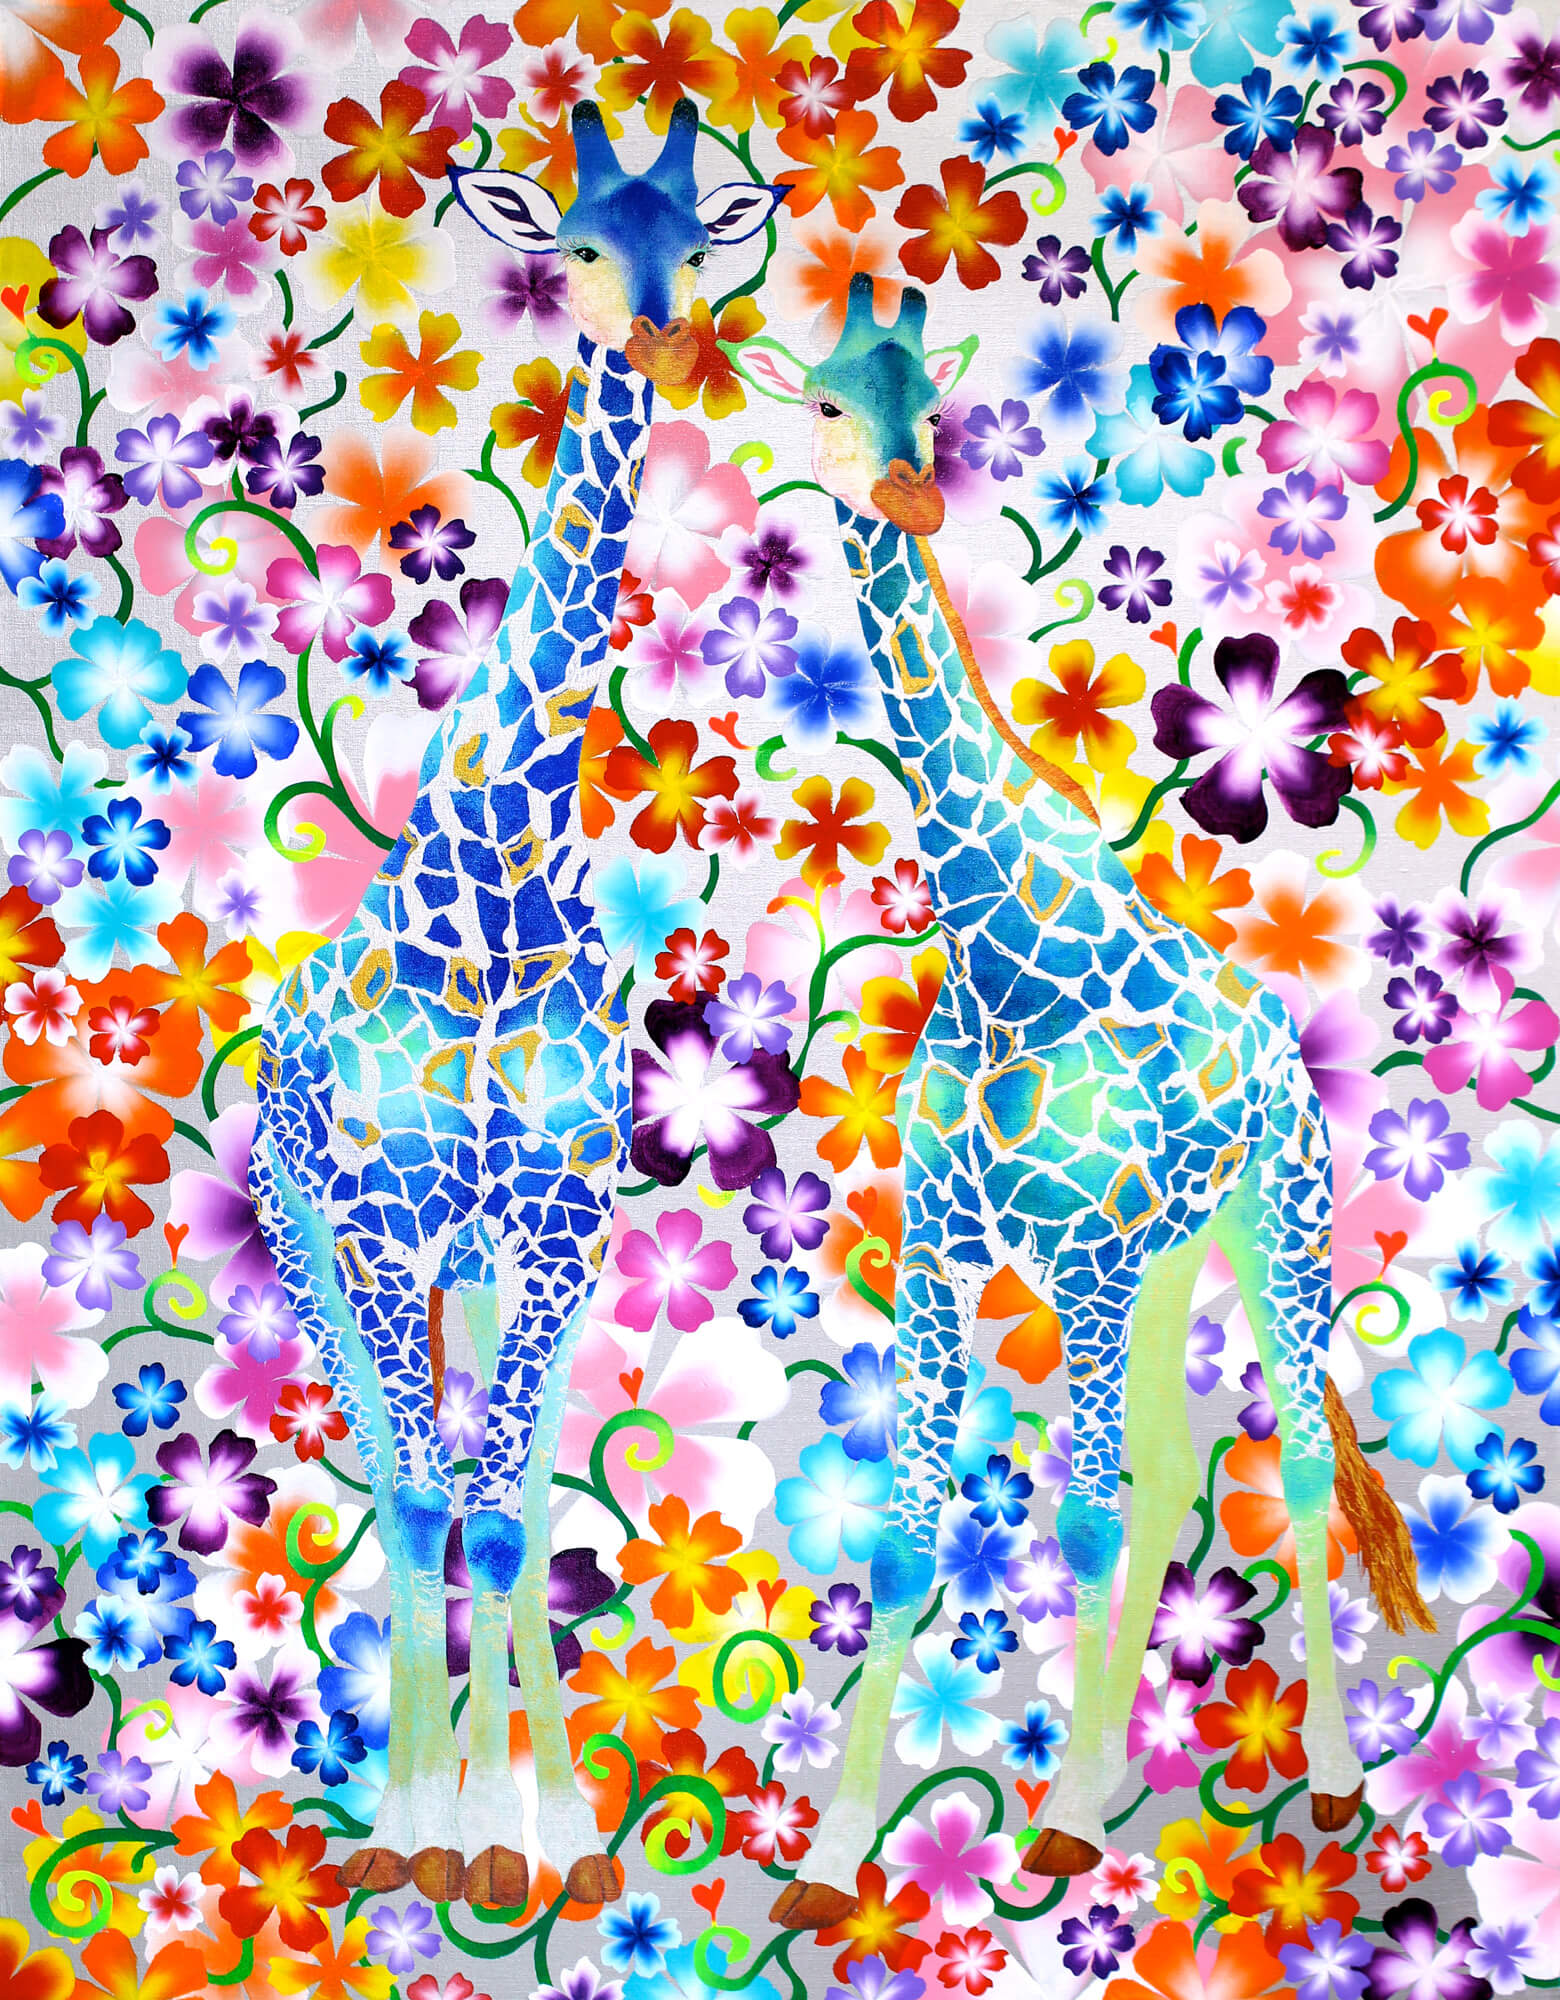 Floral Blue Giraffese改行
Acrylic and glitter on canvas, 1167×910mm, 2013